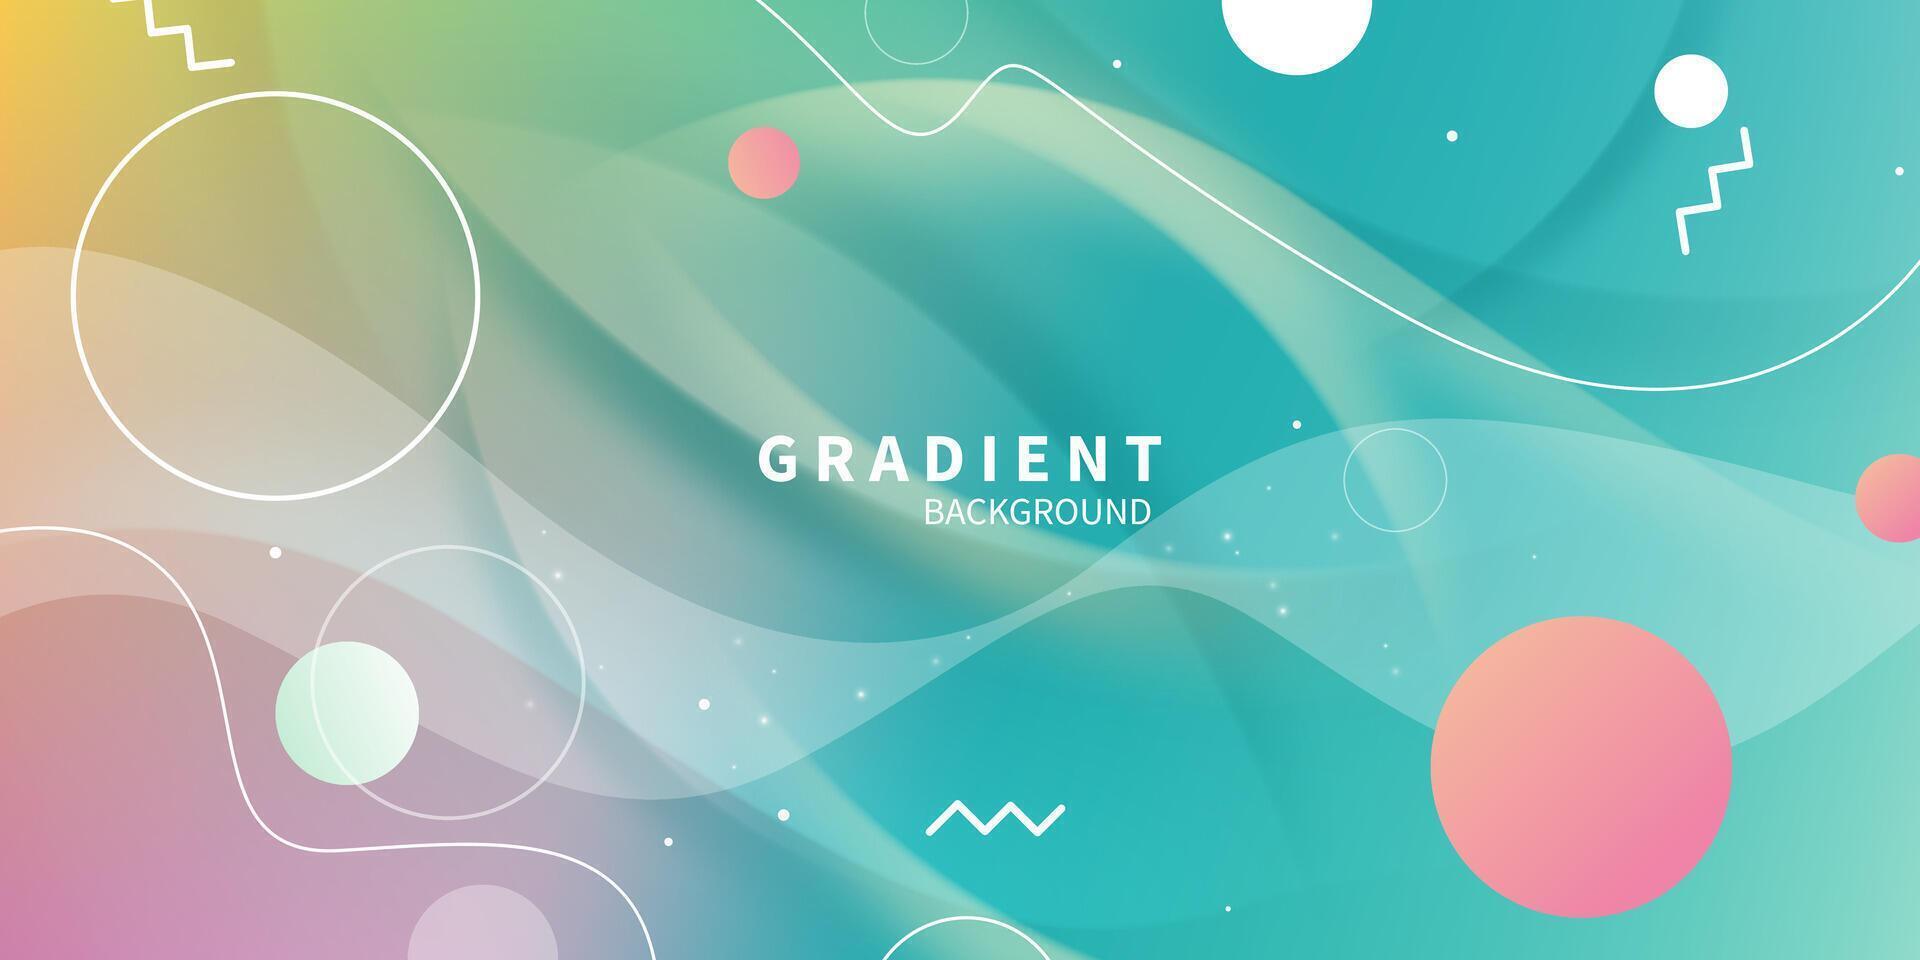 Modern vector illustration design background, abstract style.